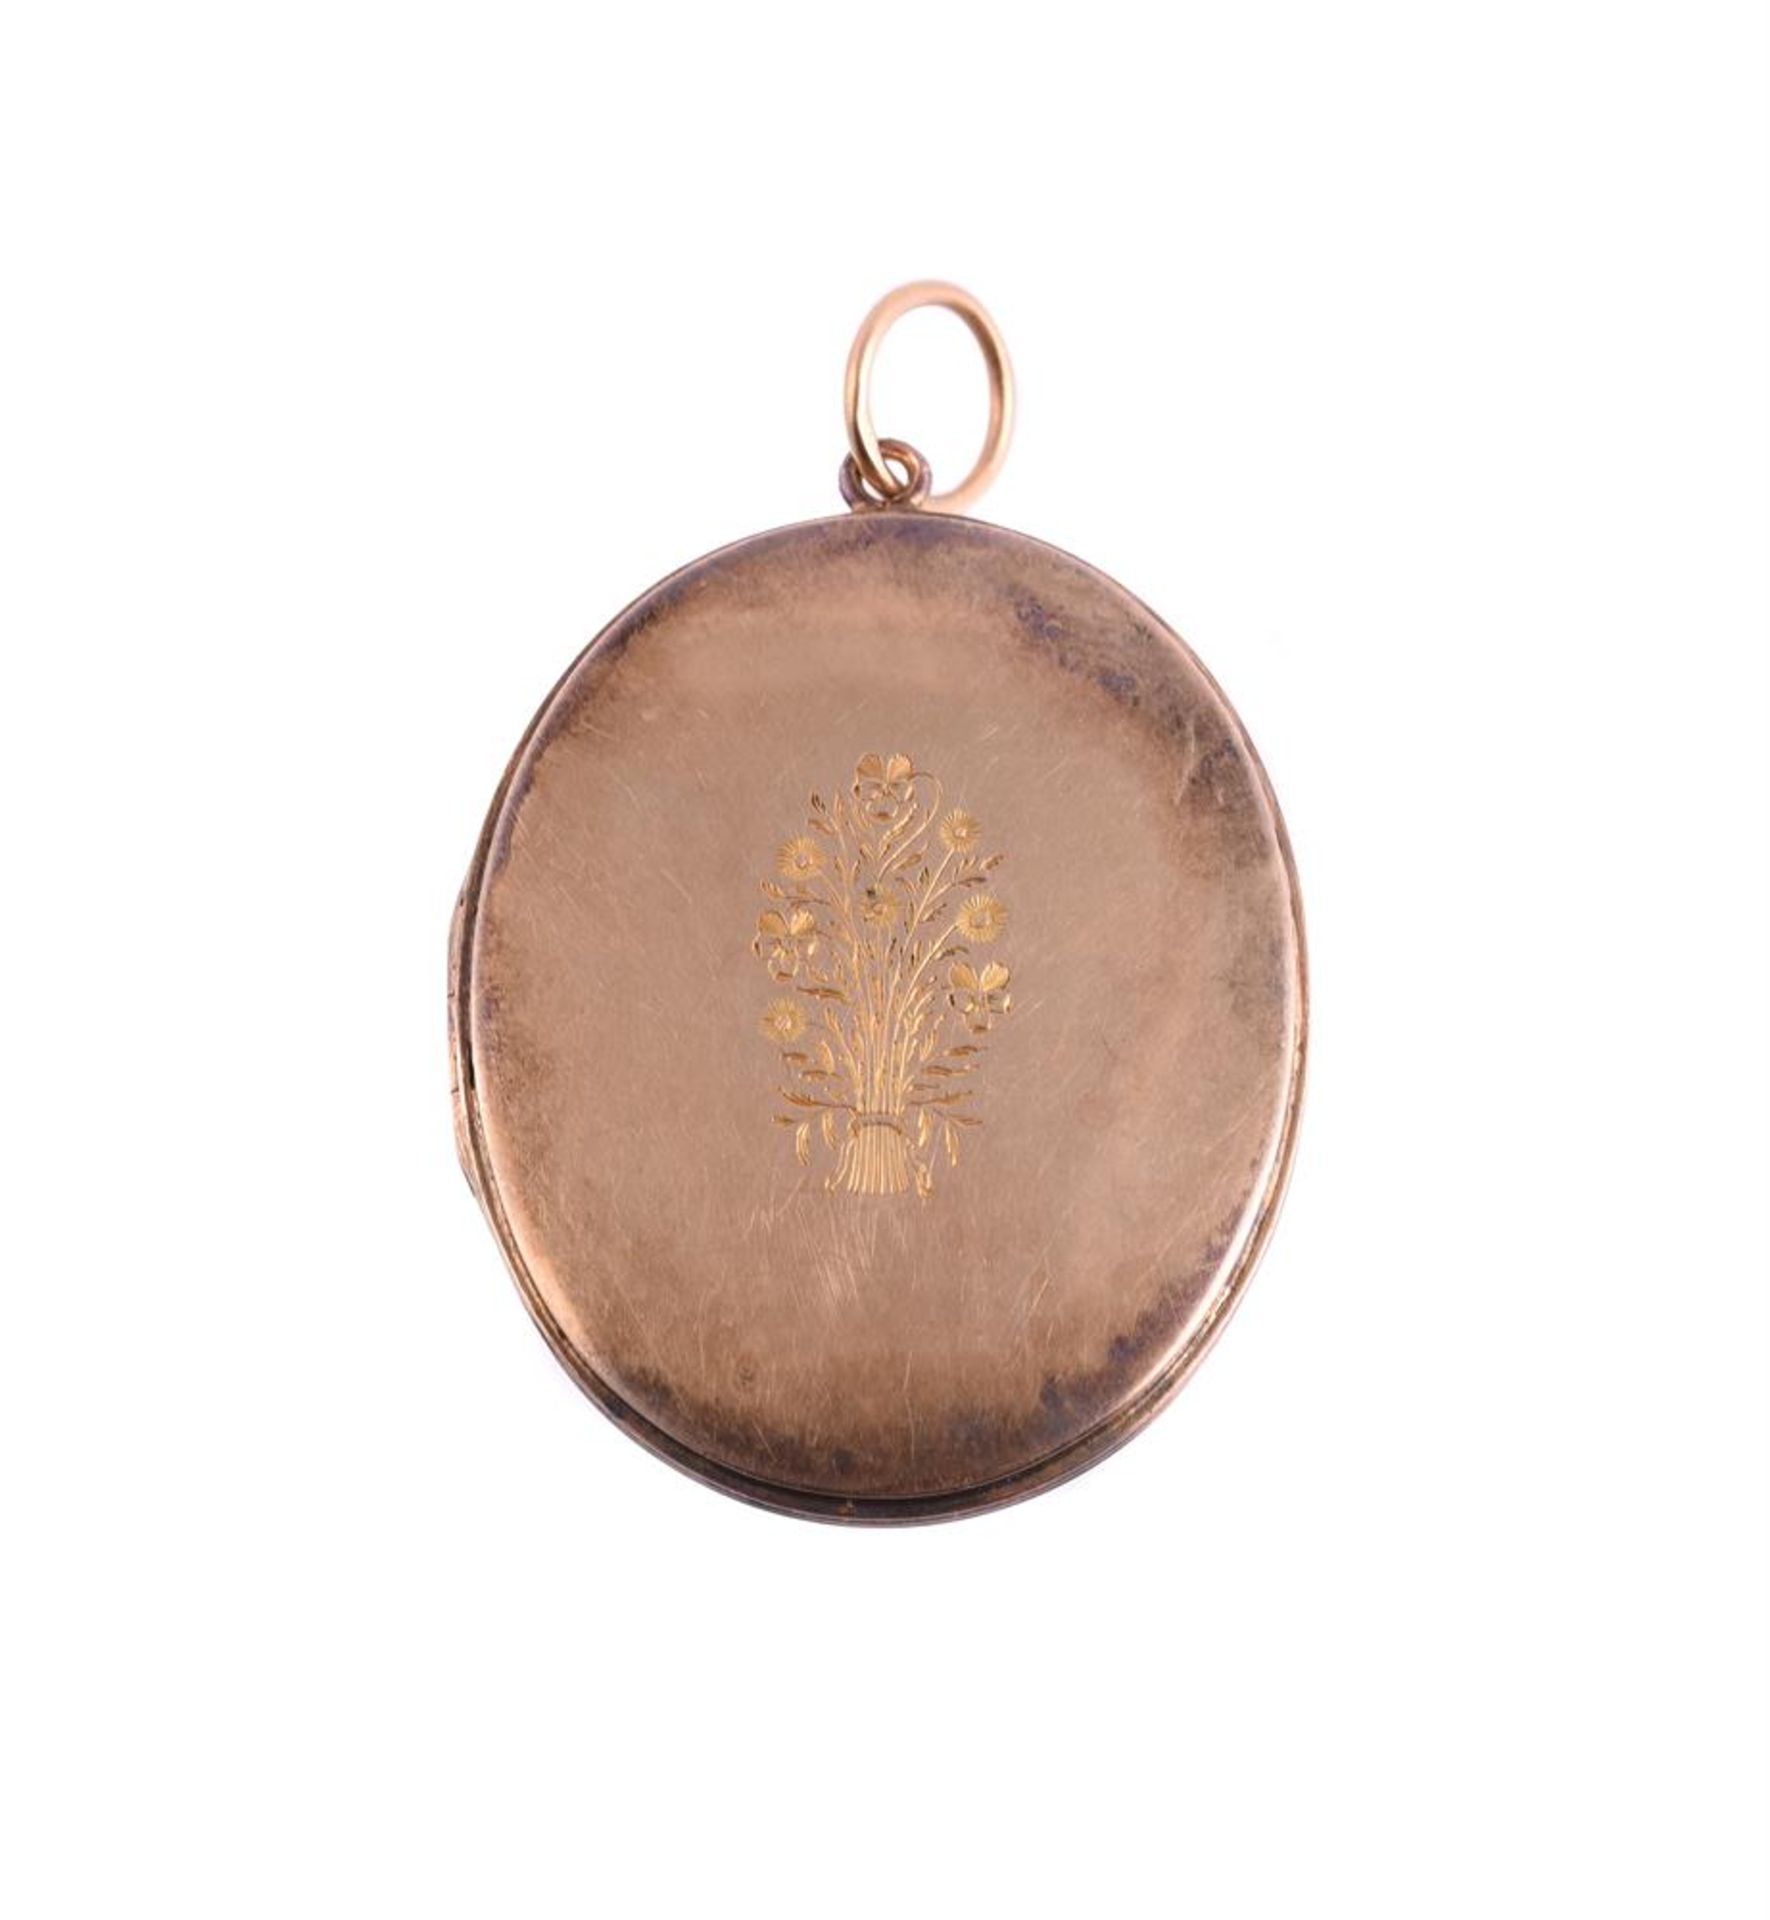 A FIRST HALF OF THE 19TH CENTURY GLAZED LOCKET, CIRCA 1840 - Image 2 of 2